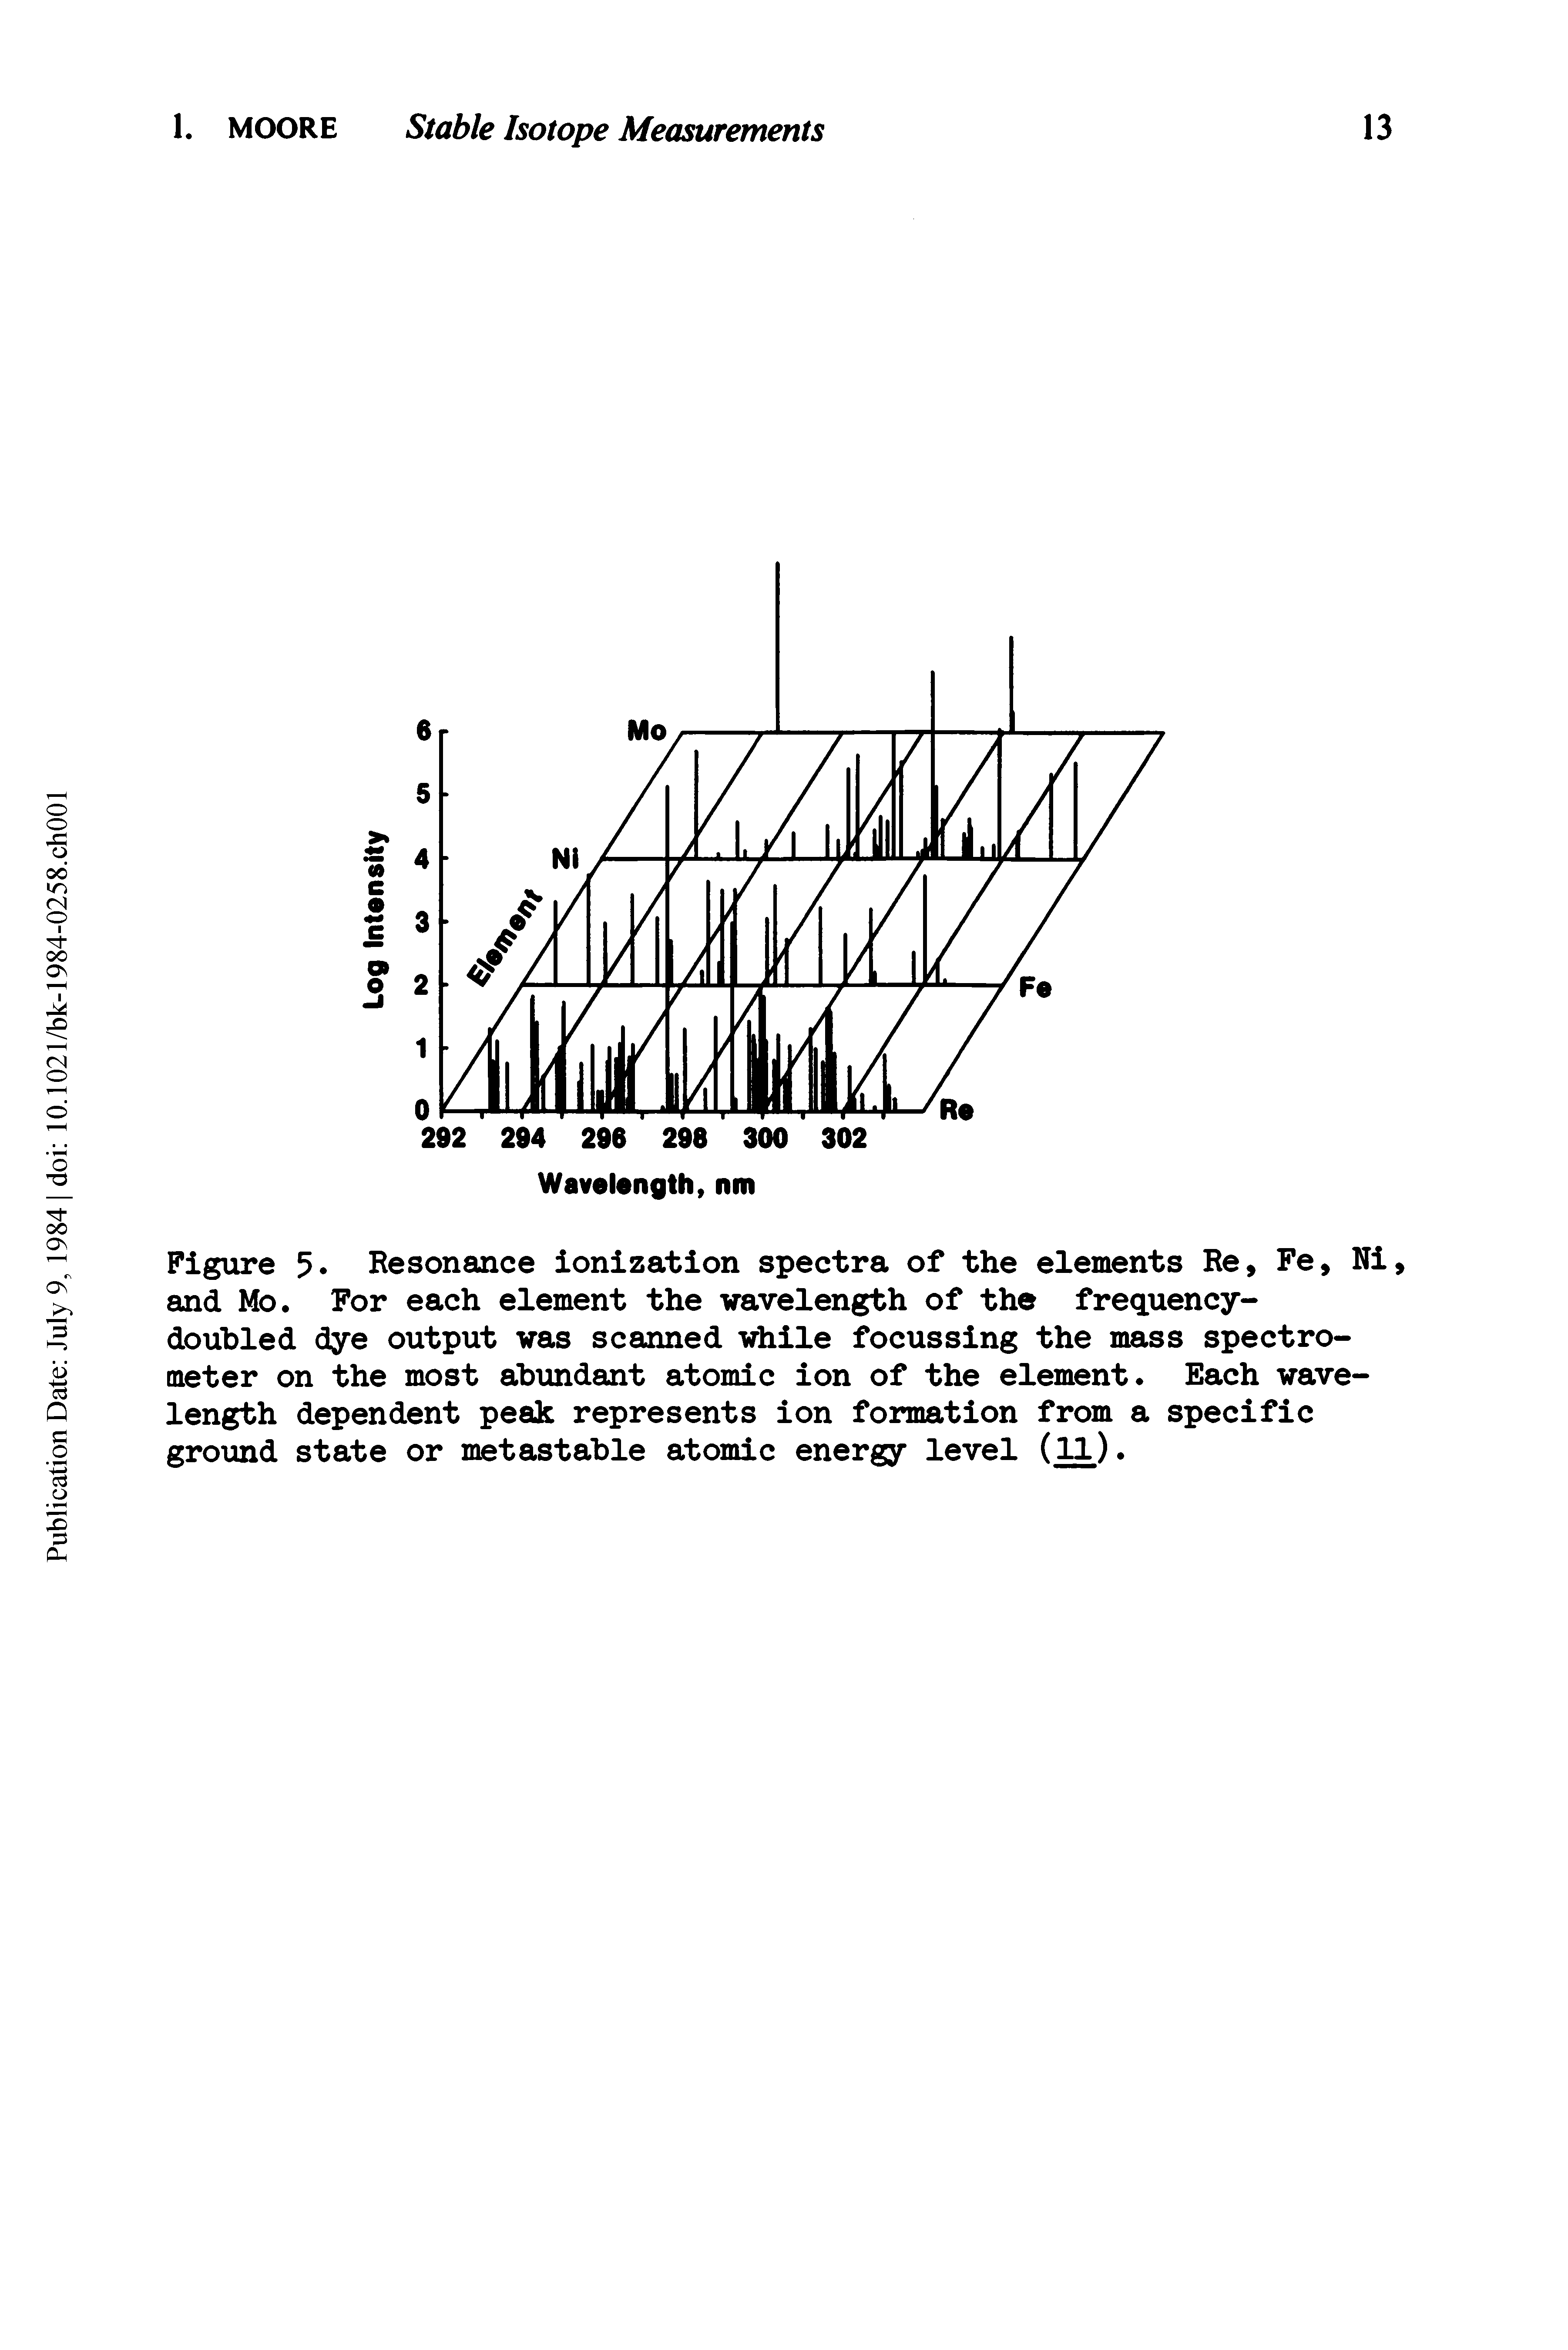 Figure 5. Resonance ionization spectra of the elements Re, Fe, Ni, and Mo. For each element the wavelength of the frequency-doubled dye output was scanned while focussing the mass spectrometer on the most abundant atomic ion of the element. Each wavelength dependent peak represents ion formation from a specific groTond state or metastable atomic energy level (ll).